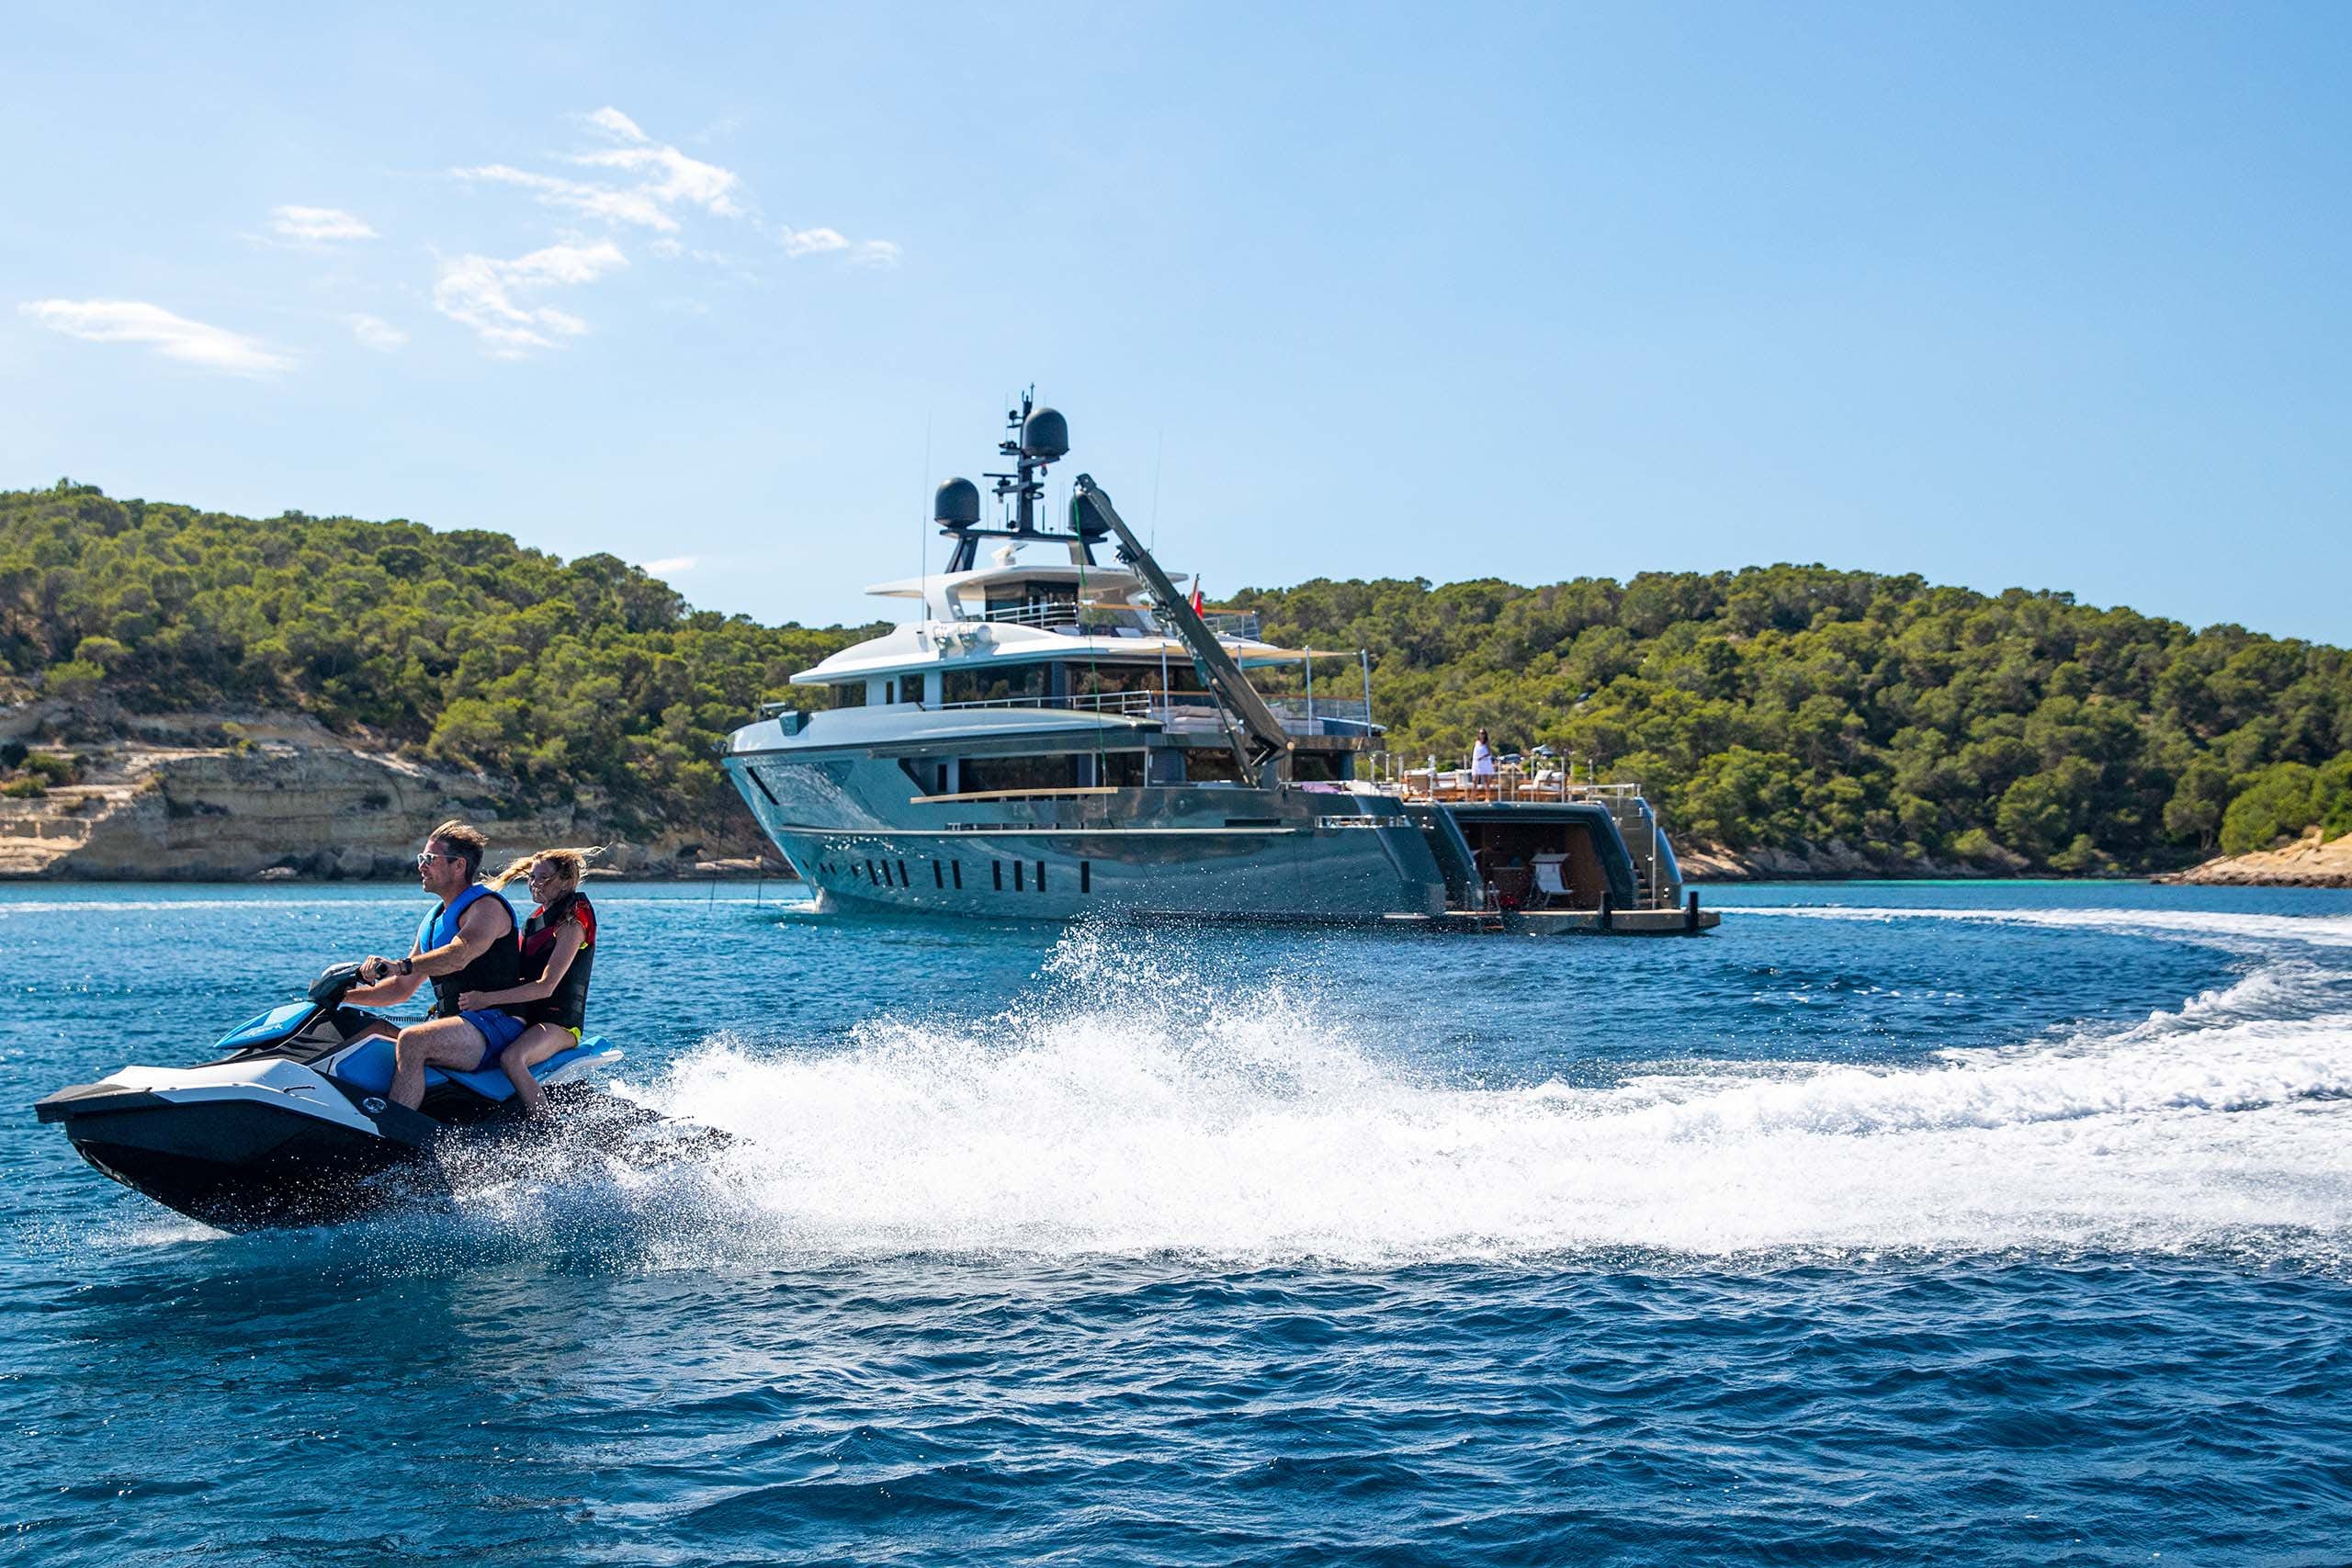 Couple playing on jet ski next to motor yacht MOKA during a summer yacht charter vacation